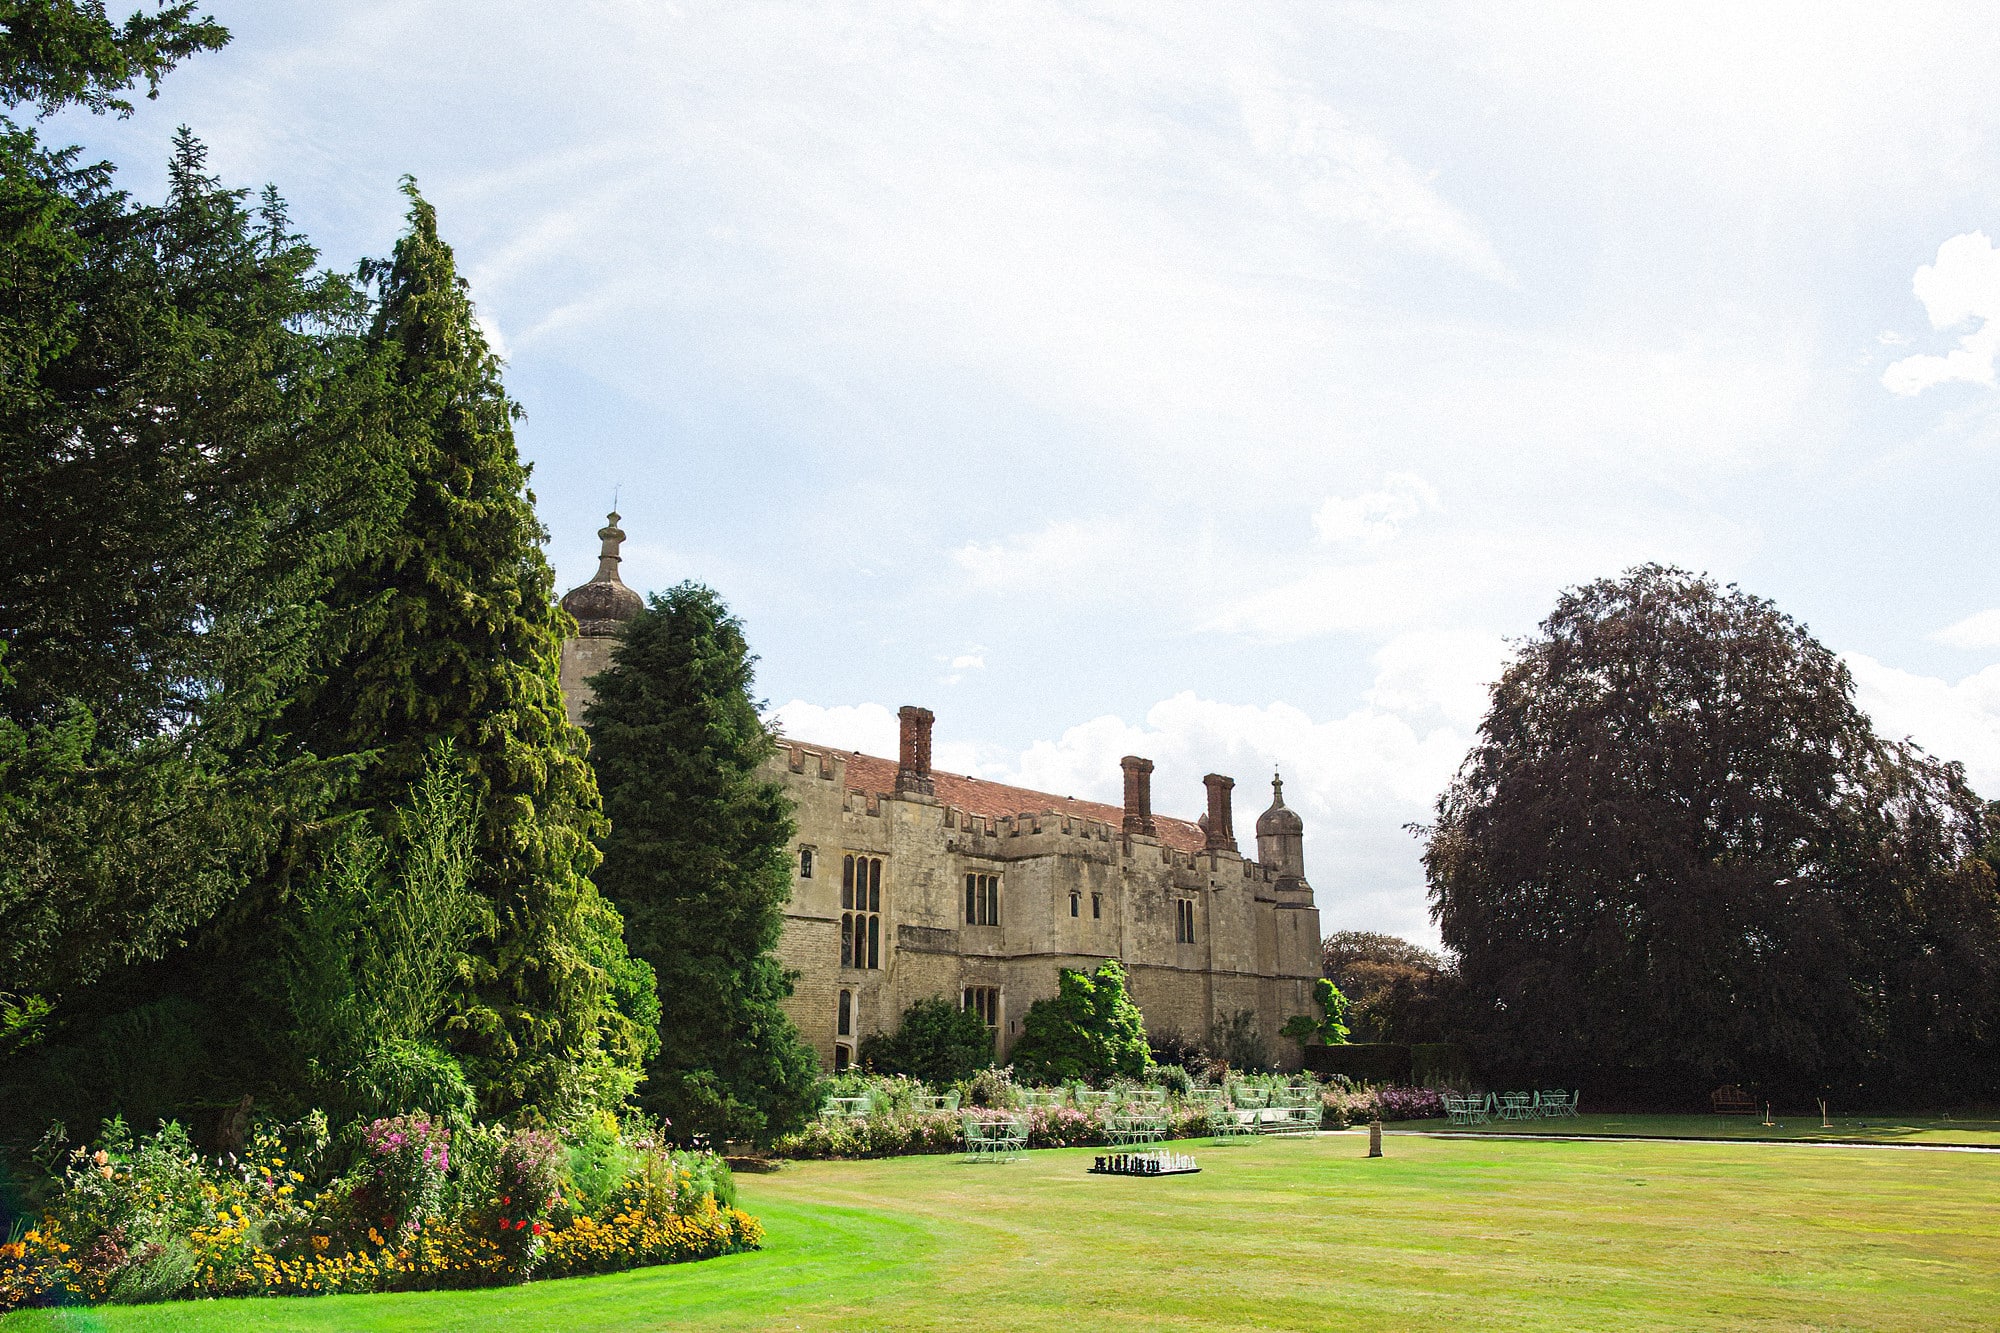 view of hengrave hall from the gardens